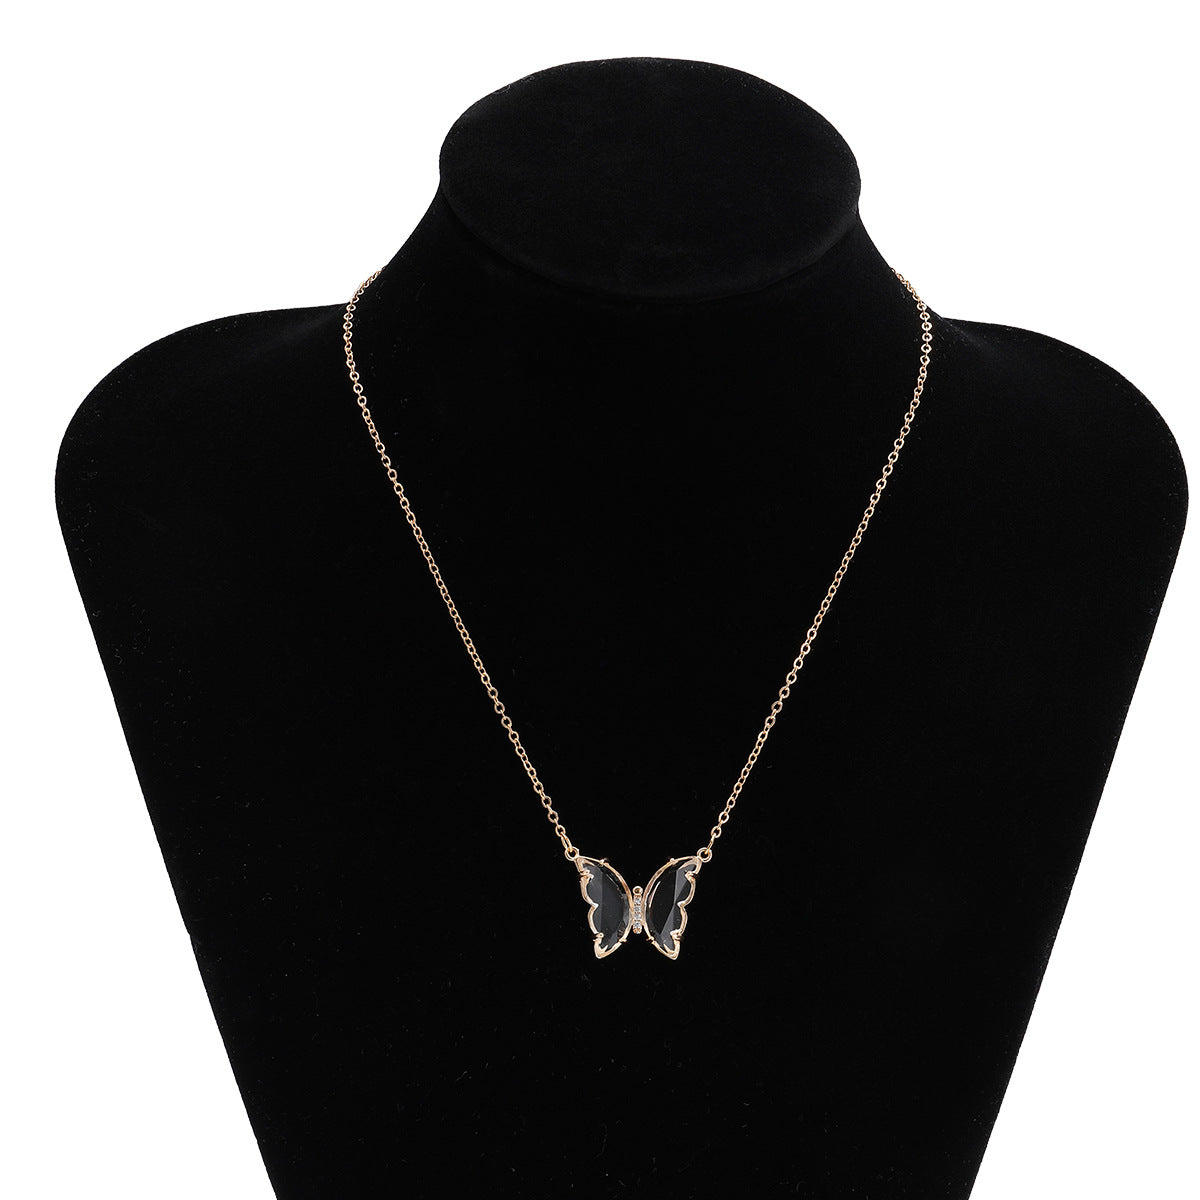 Chic Butterfly Zircon Pendant Necklace with Geometric Flair